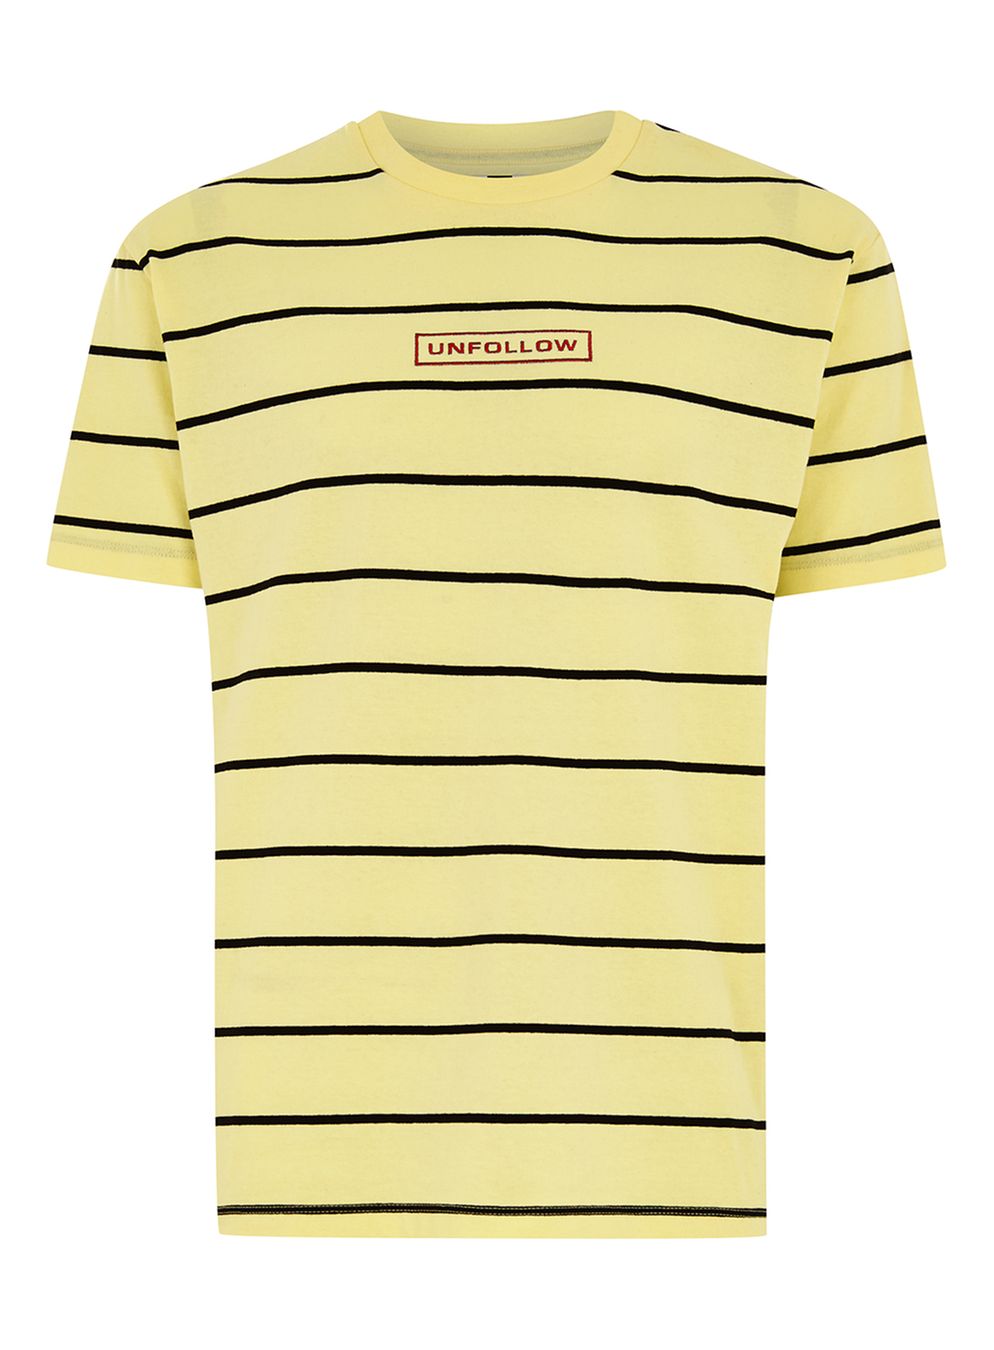 Yellow Oversized Striped T-Shirt - Hello! We are wt+